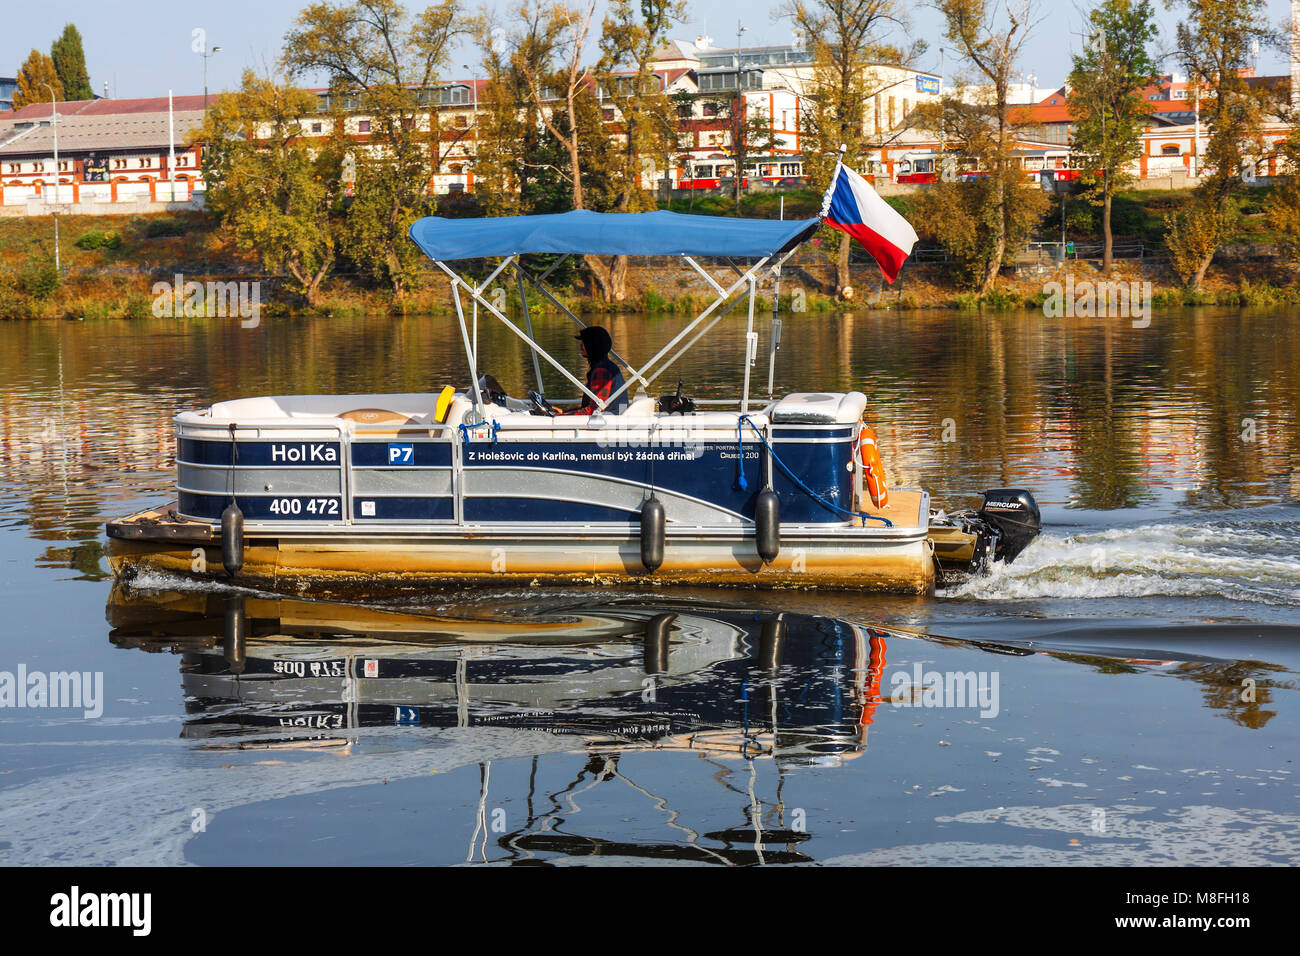 PRAGUE - October 1: Ferry Hol Ka transports passengers from district Karlin to district Holesovice on October 1, 2017 on Vltava river. Stock Photo